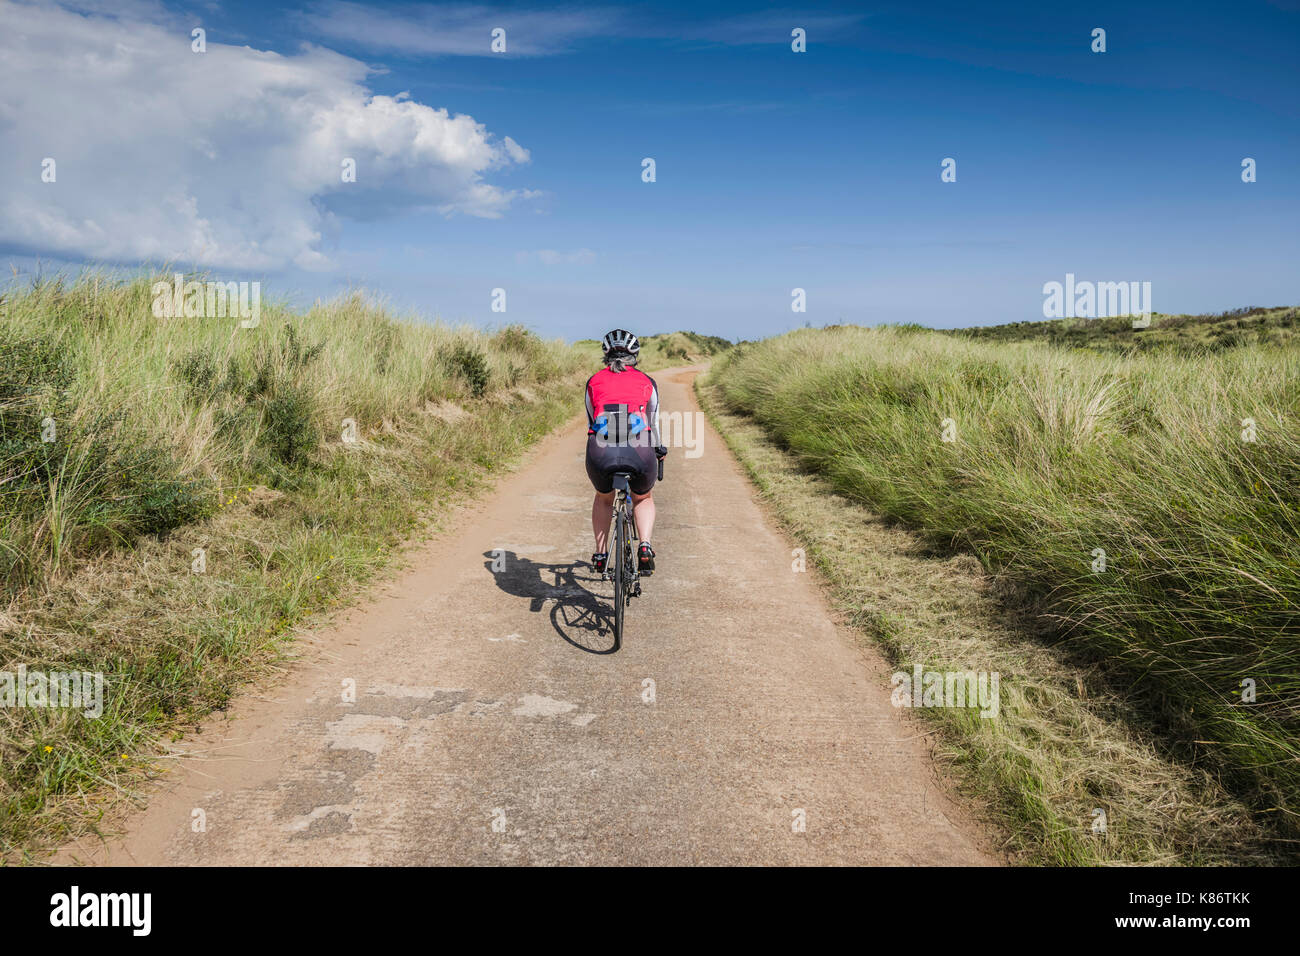 A fine weather day at Spurn Head, East Yorkshire, UK. Stock Photo